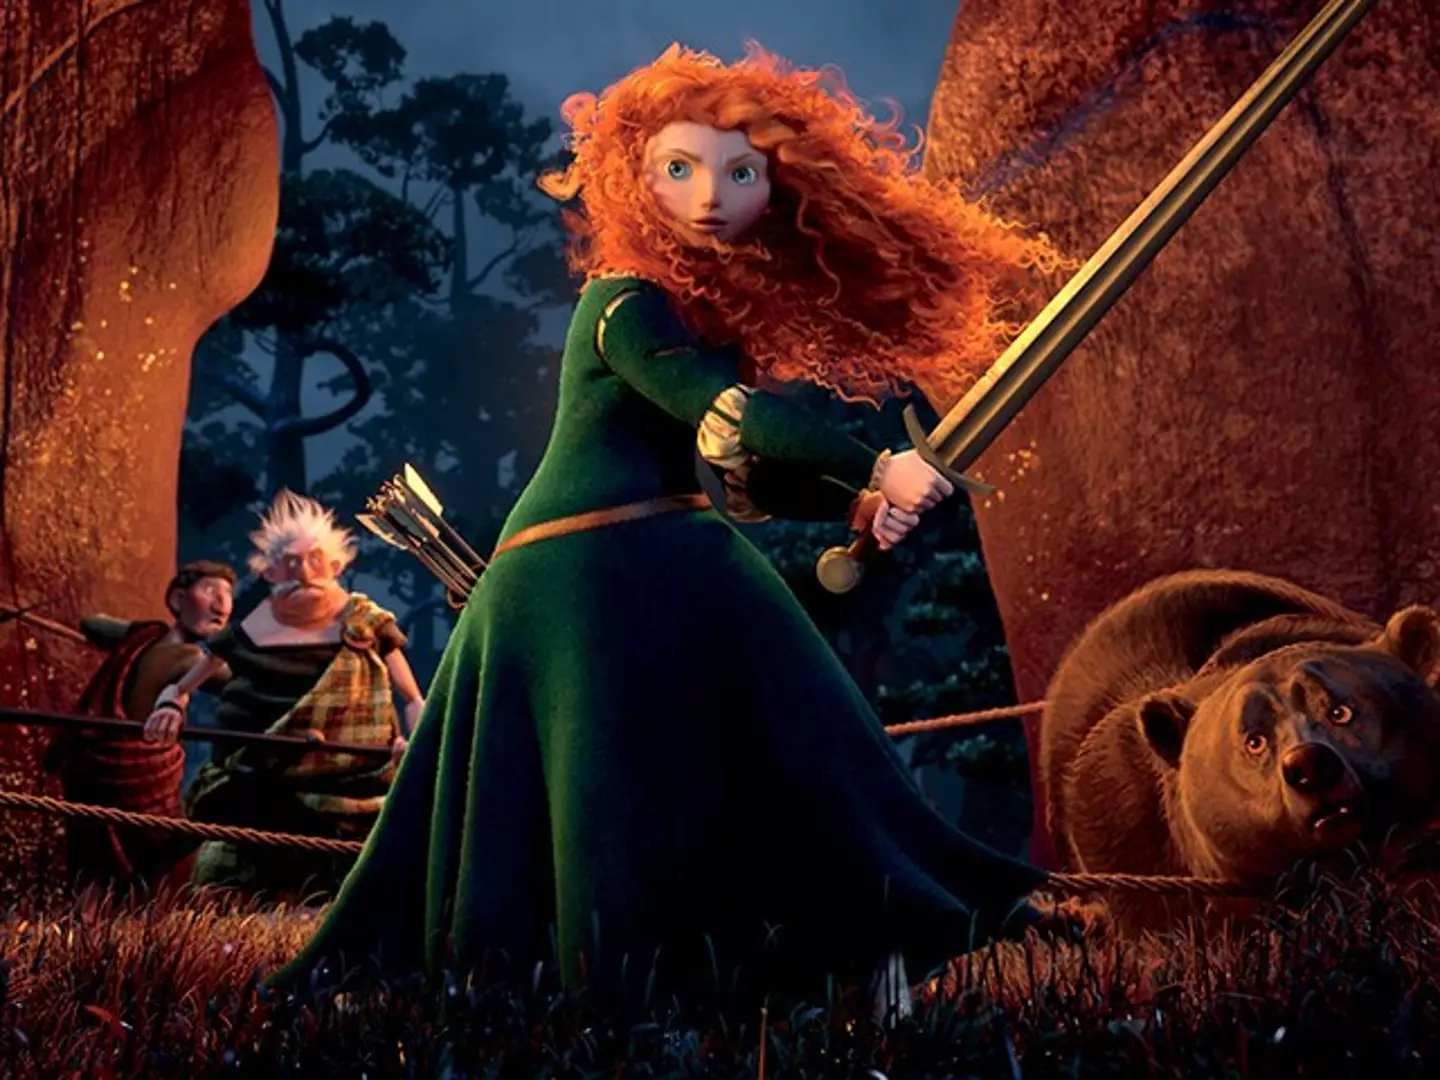 Princess Merida may have packed a punch, but the movie didn't take the Pixar throne.